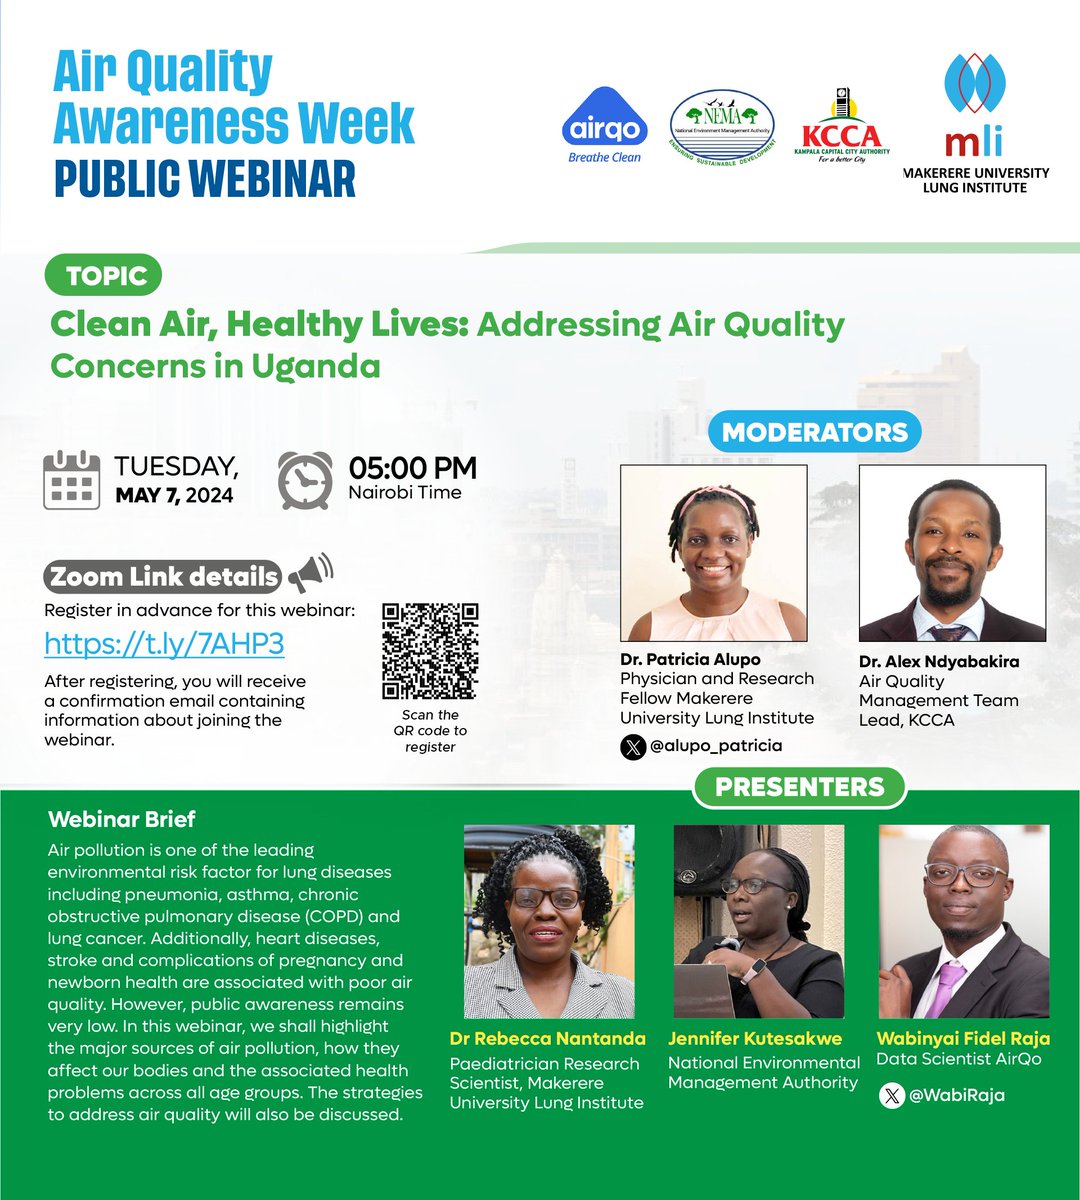 📢Happening today at 5:00PM. Join us together with @Lung_Institute @KCCAUG @nemaug for this insightful webinar to discuss 'Clean Air, Healthy Lives: Addressing Air Quality Concerns in Uganda.' 🗓️ Tuesday 7th May 📍bit.ly/3ULQQd0 ⏲️ 5:00PM #AQAW2024 #AQAW24